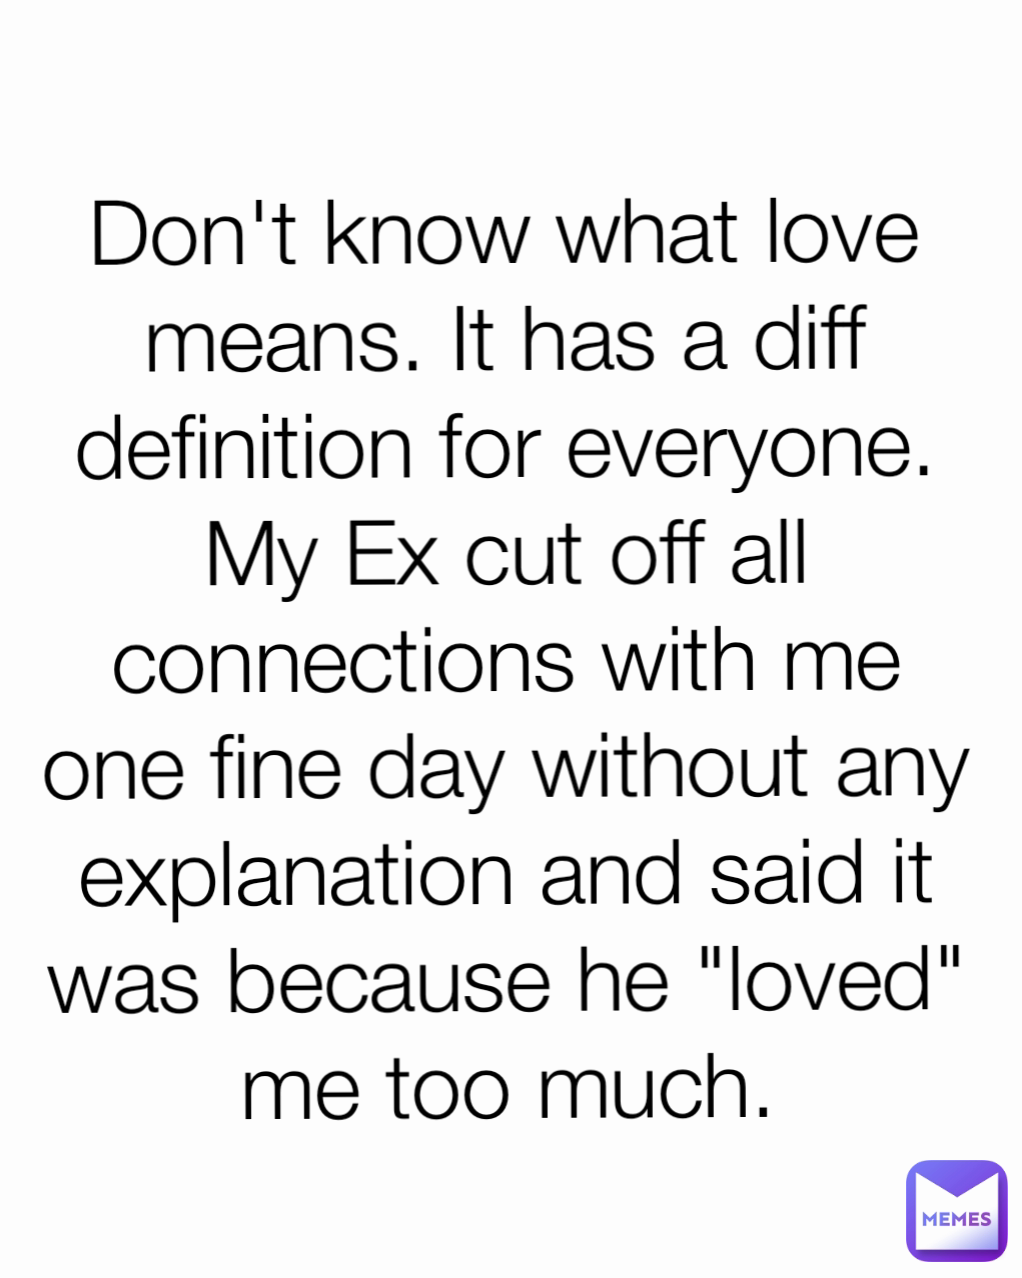 Don't know what love means. It has a diff definition for everyone. My Ex cut off all connections with me one fine day without any explanation and said it was because he "loved" me too much.